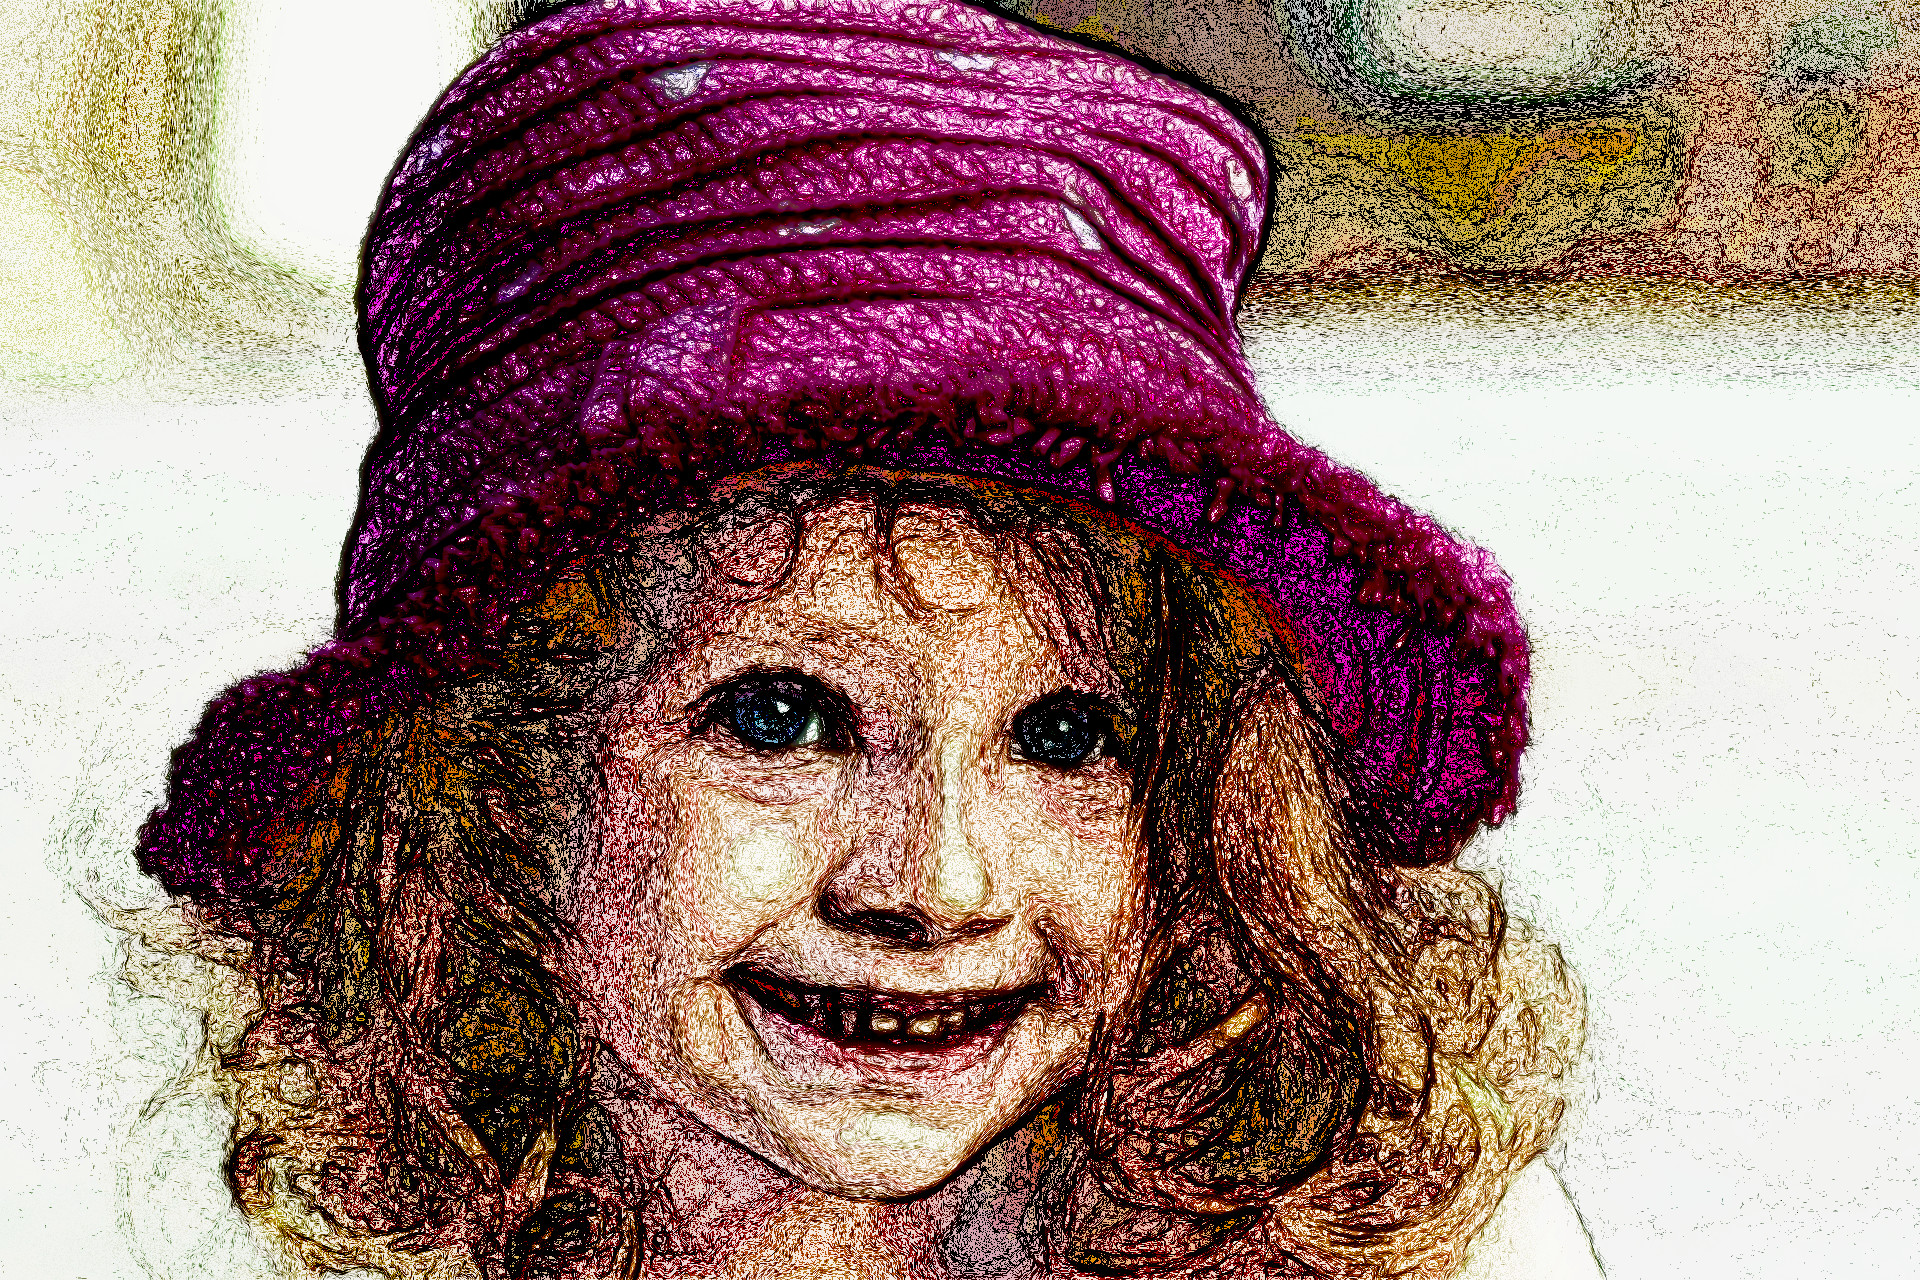 2024-01-11 17-44-14 girl-4260884_1920 with a Drawing Effect 2024 v.1.2 (True,6,8,10,2).JPG